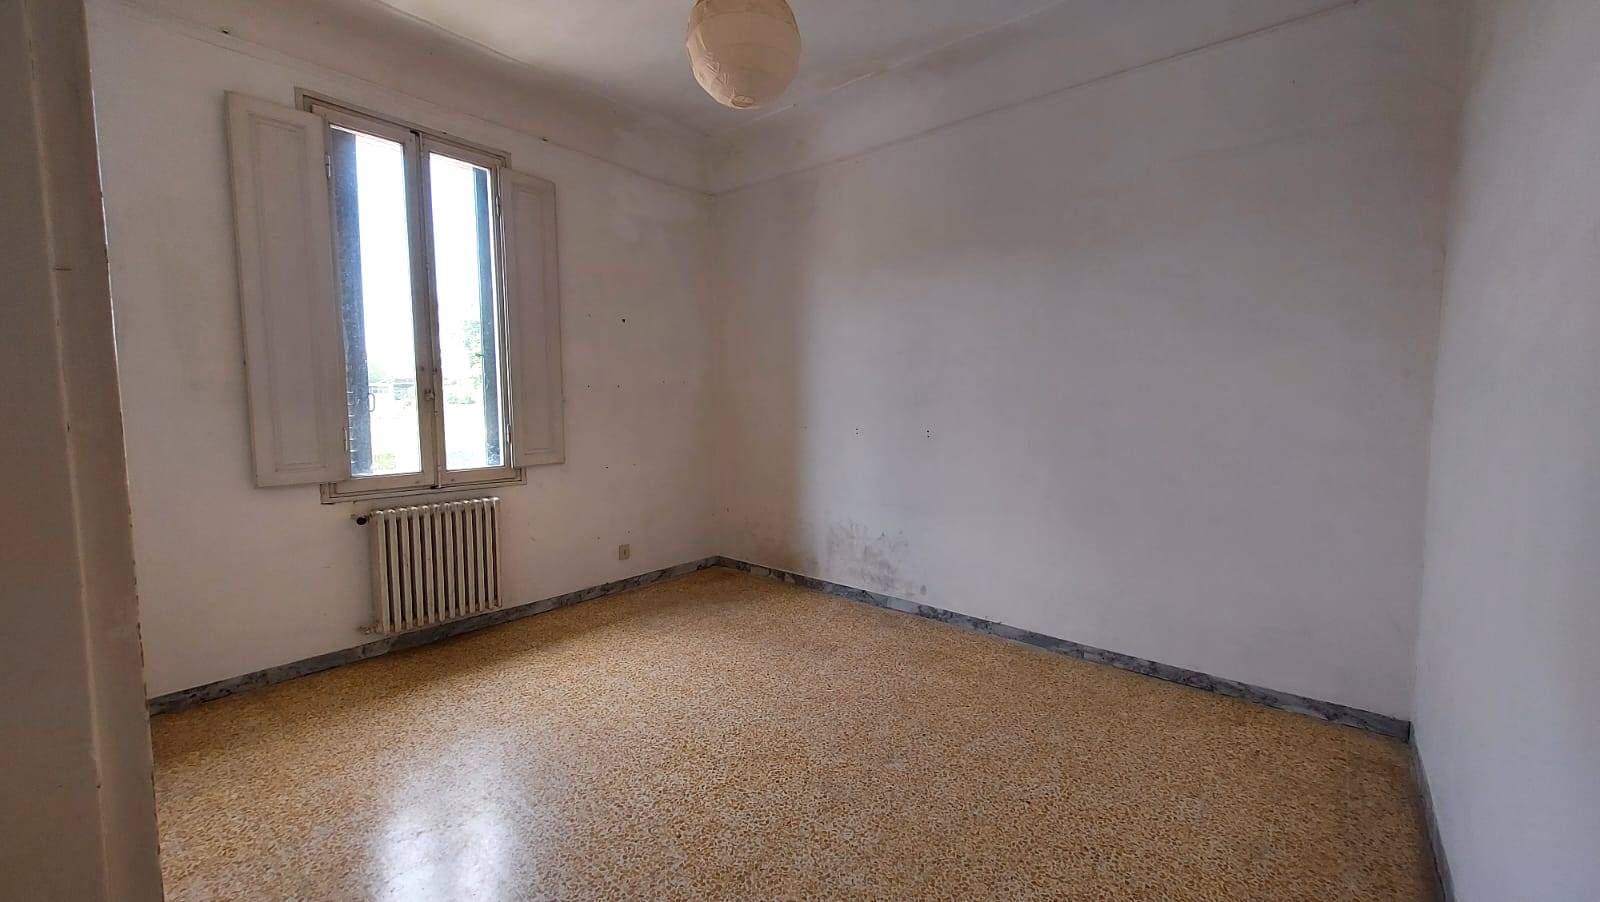 SAN IACOPINO, FIRENZE, Terraced house for sale of 150 Sq. mt., Be restored, Heating Individual heating system, Energetic class: F, Epi: 125,6 kwh/m2 